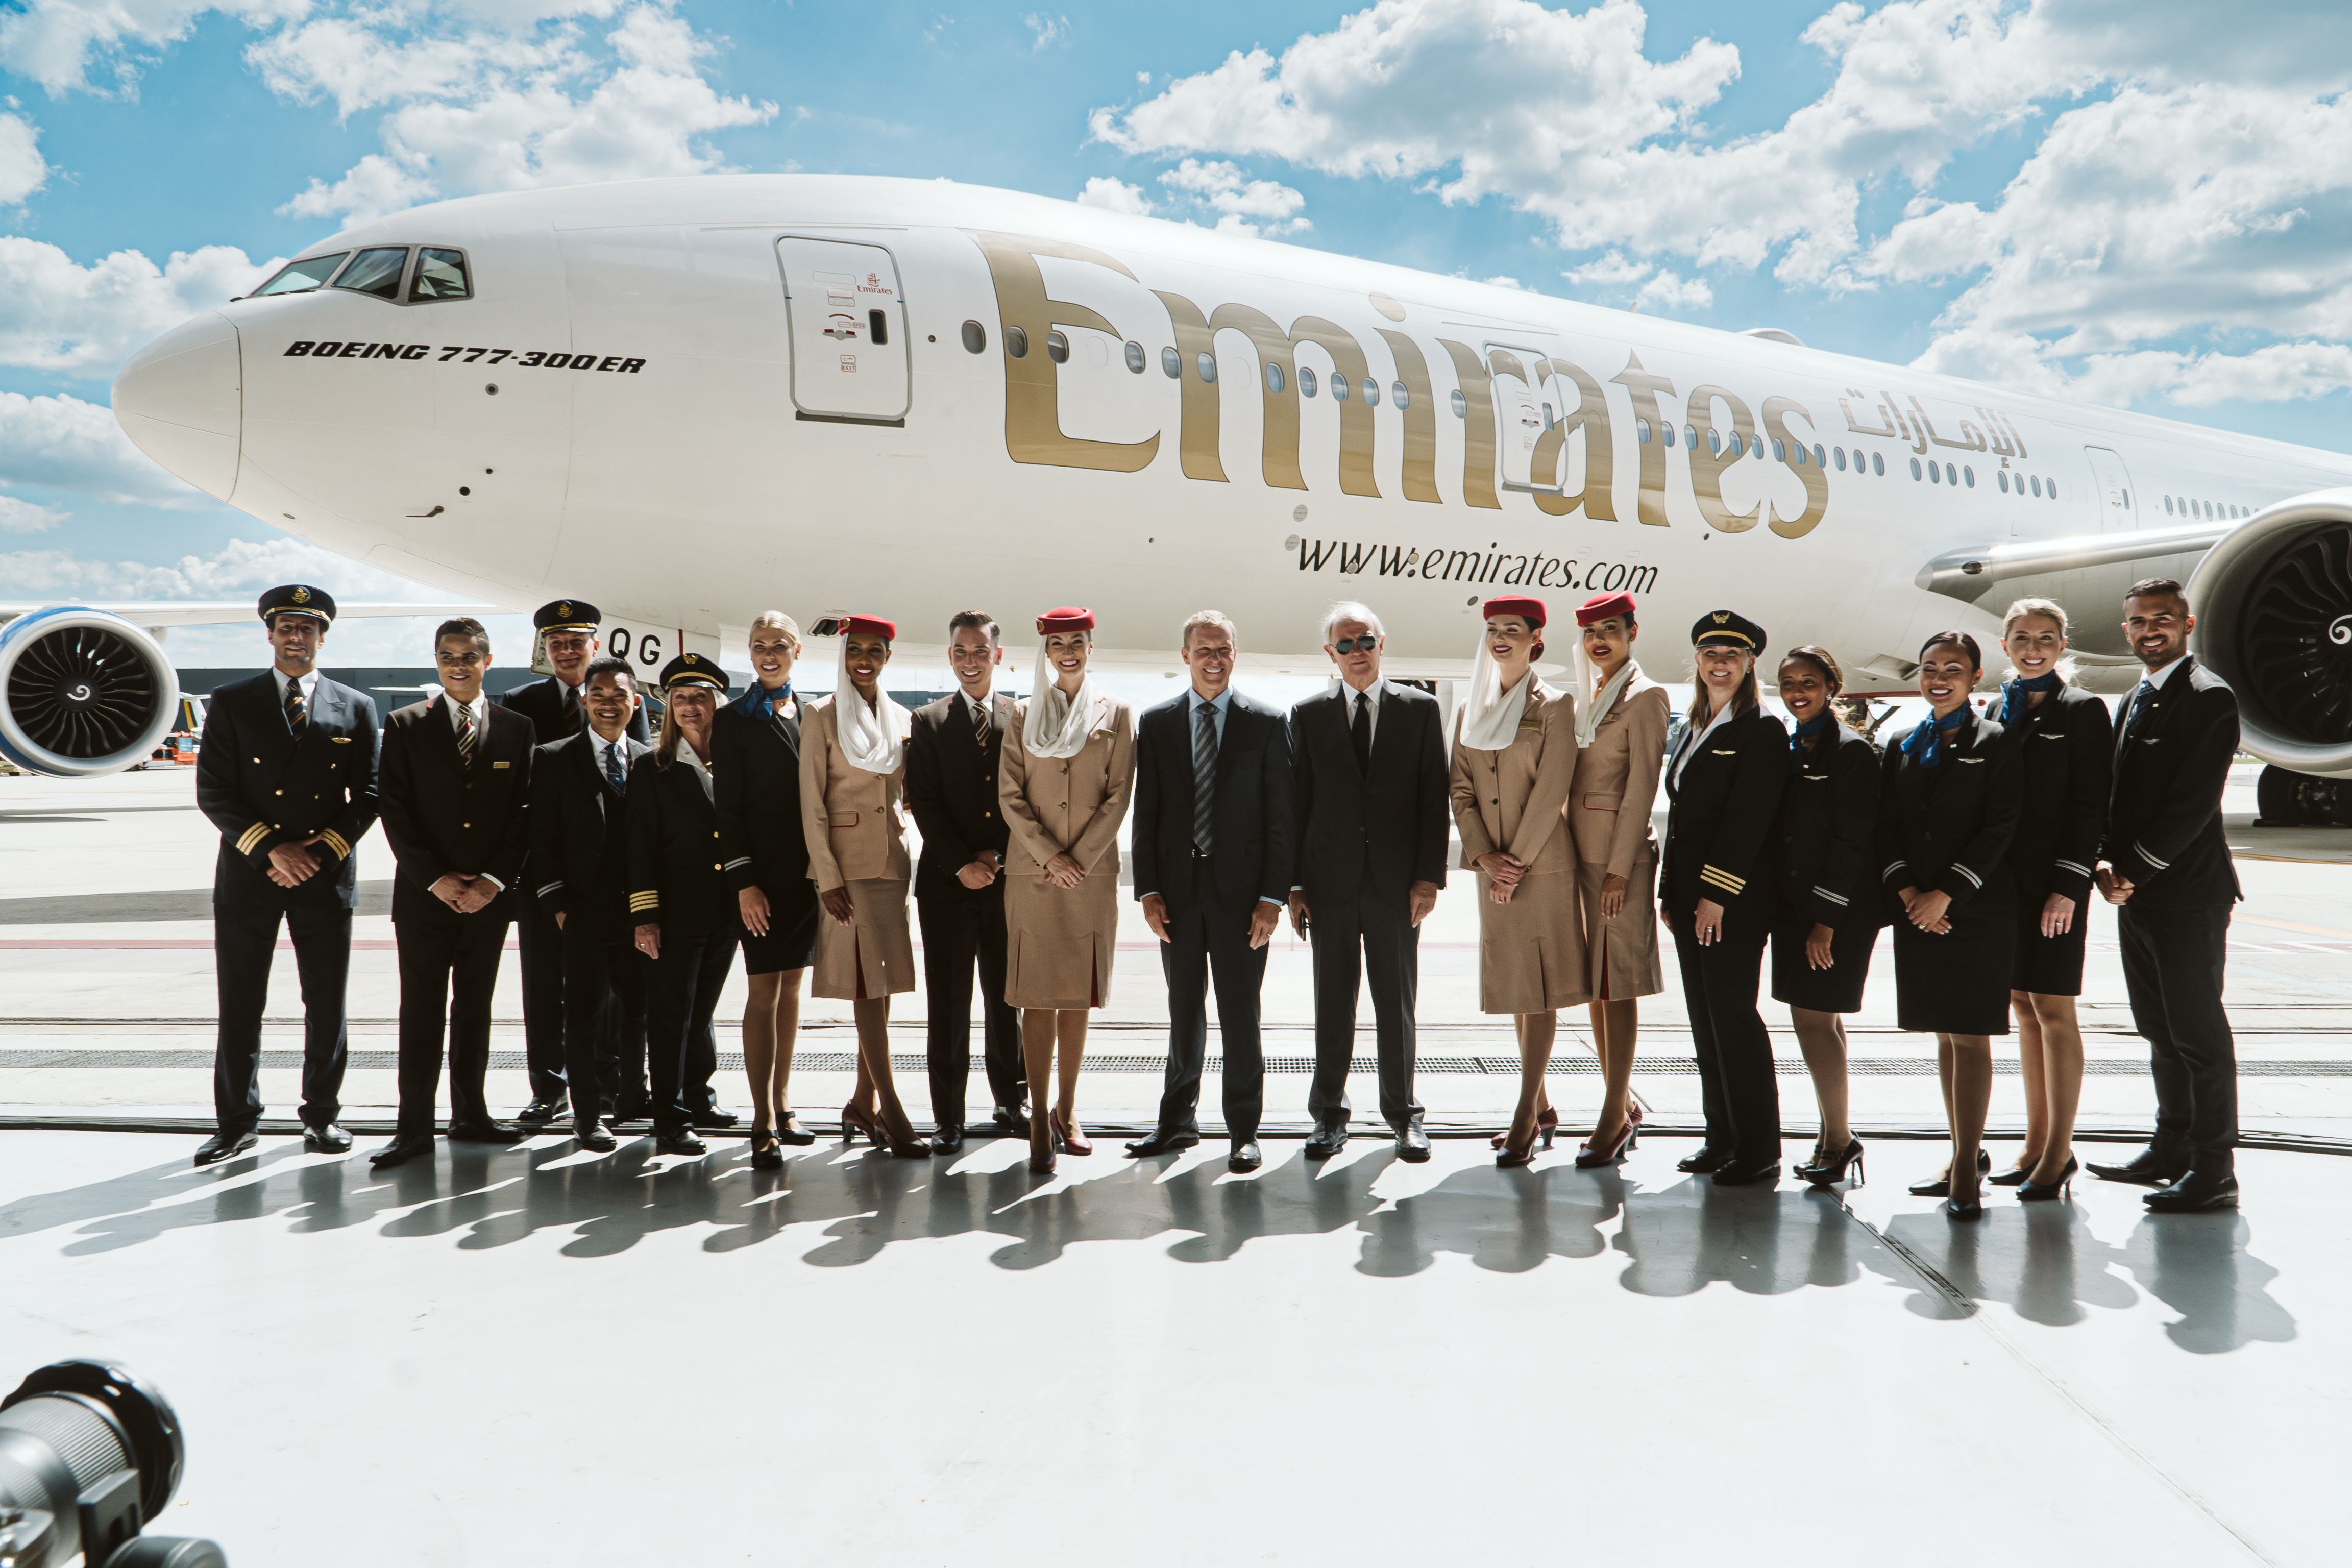 United and Emirates Crew with Scott Kirby and Tim Clark and a Emirates Boeing 777-300ER in the background